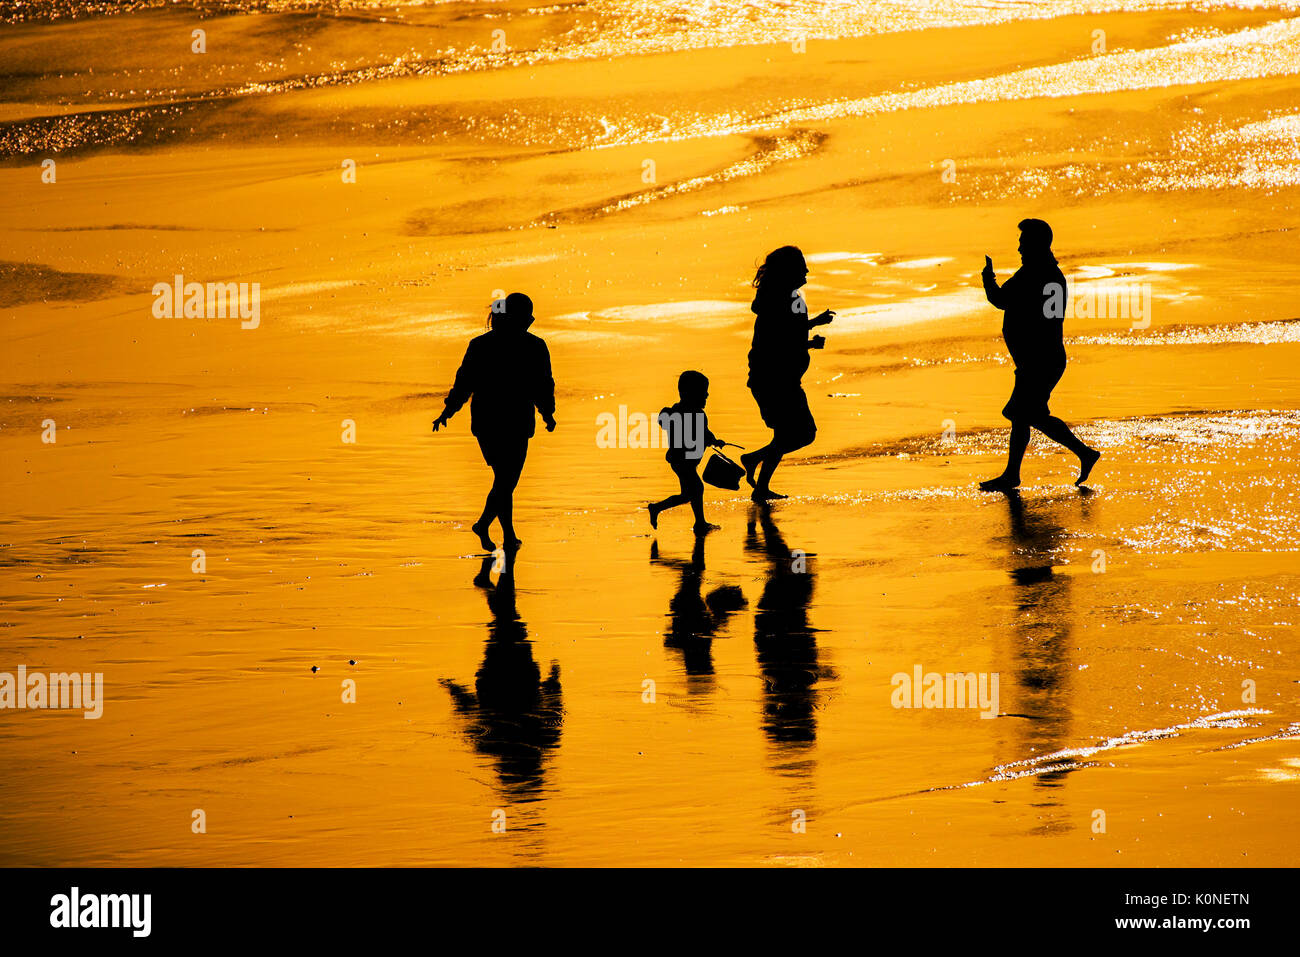 The silhouette of a family of holidaymakers enjoying themselves on the beach at sunset. Stock Photo